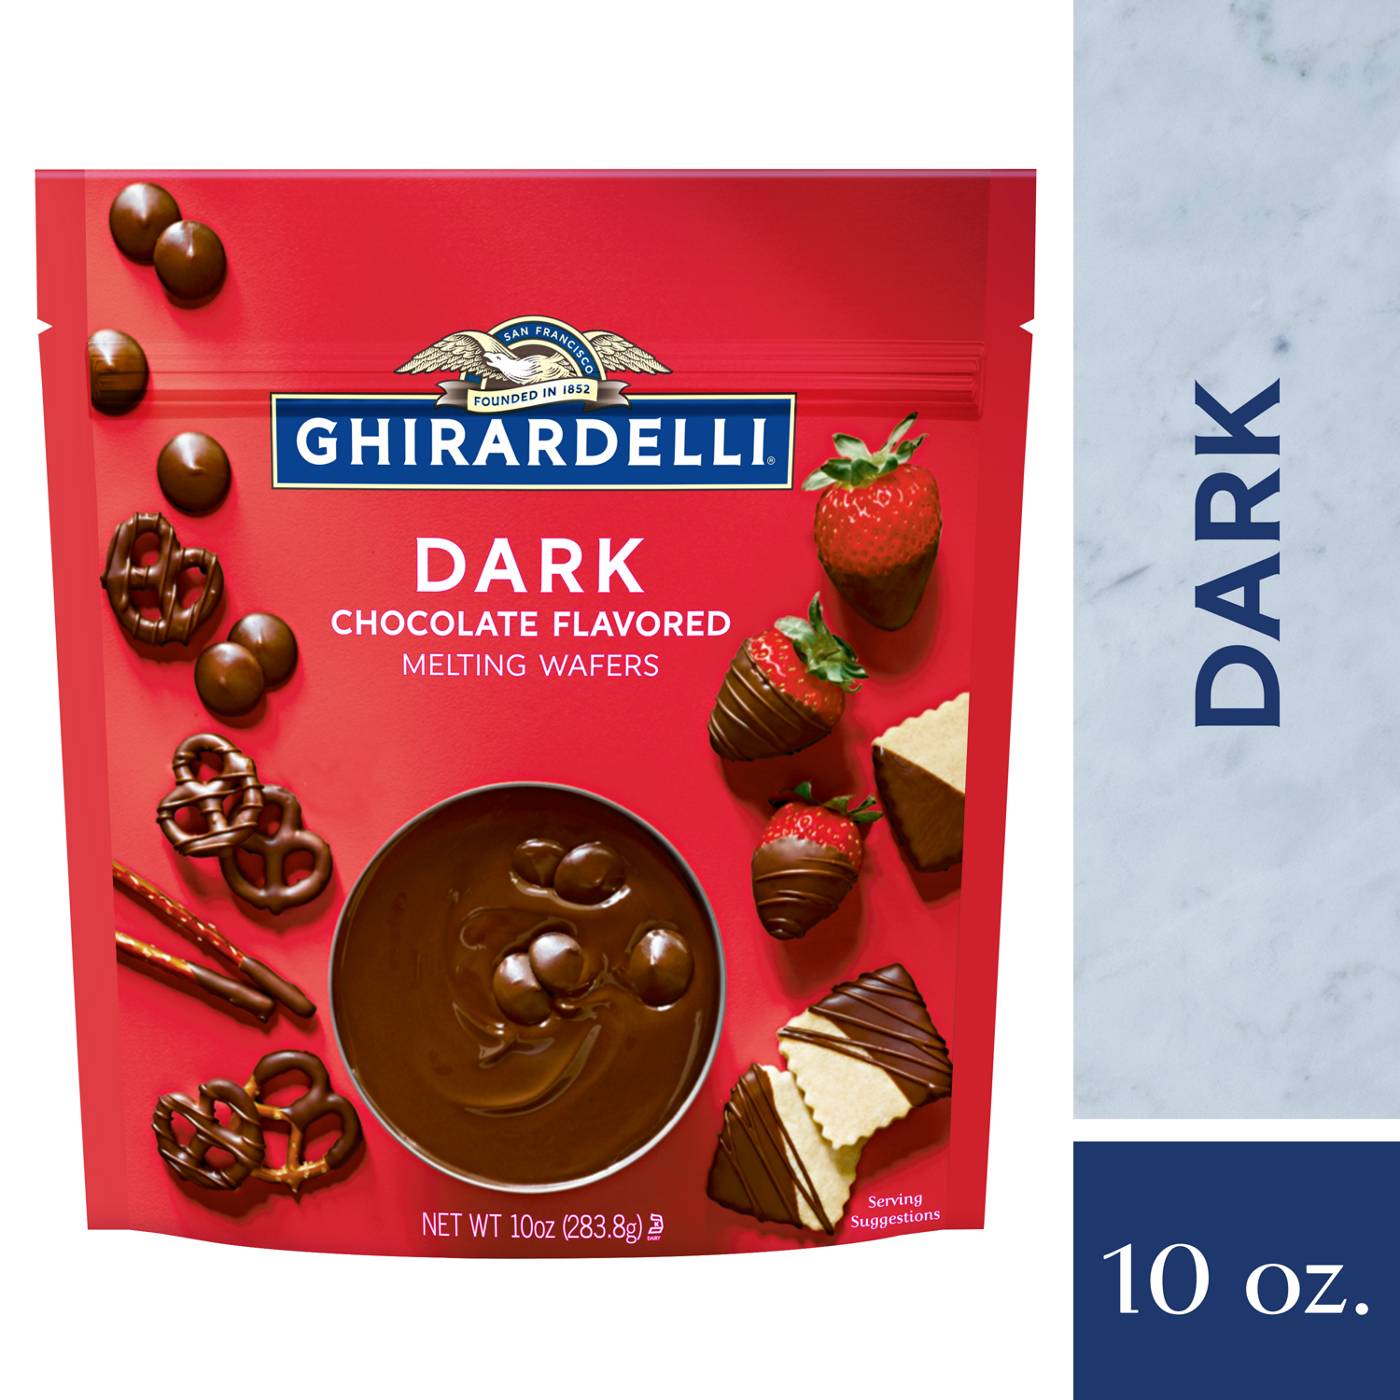 Ghirardelli Dark Chocolate Flavored Melting Wafers; image 6 of 7